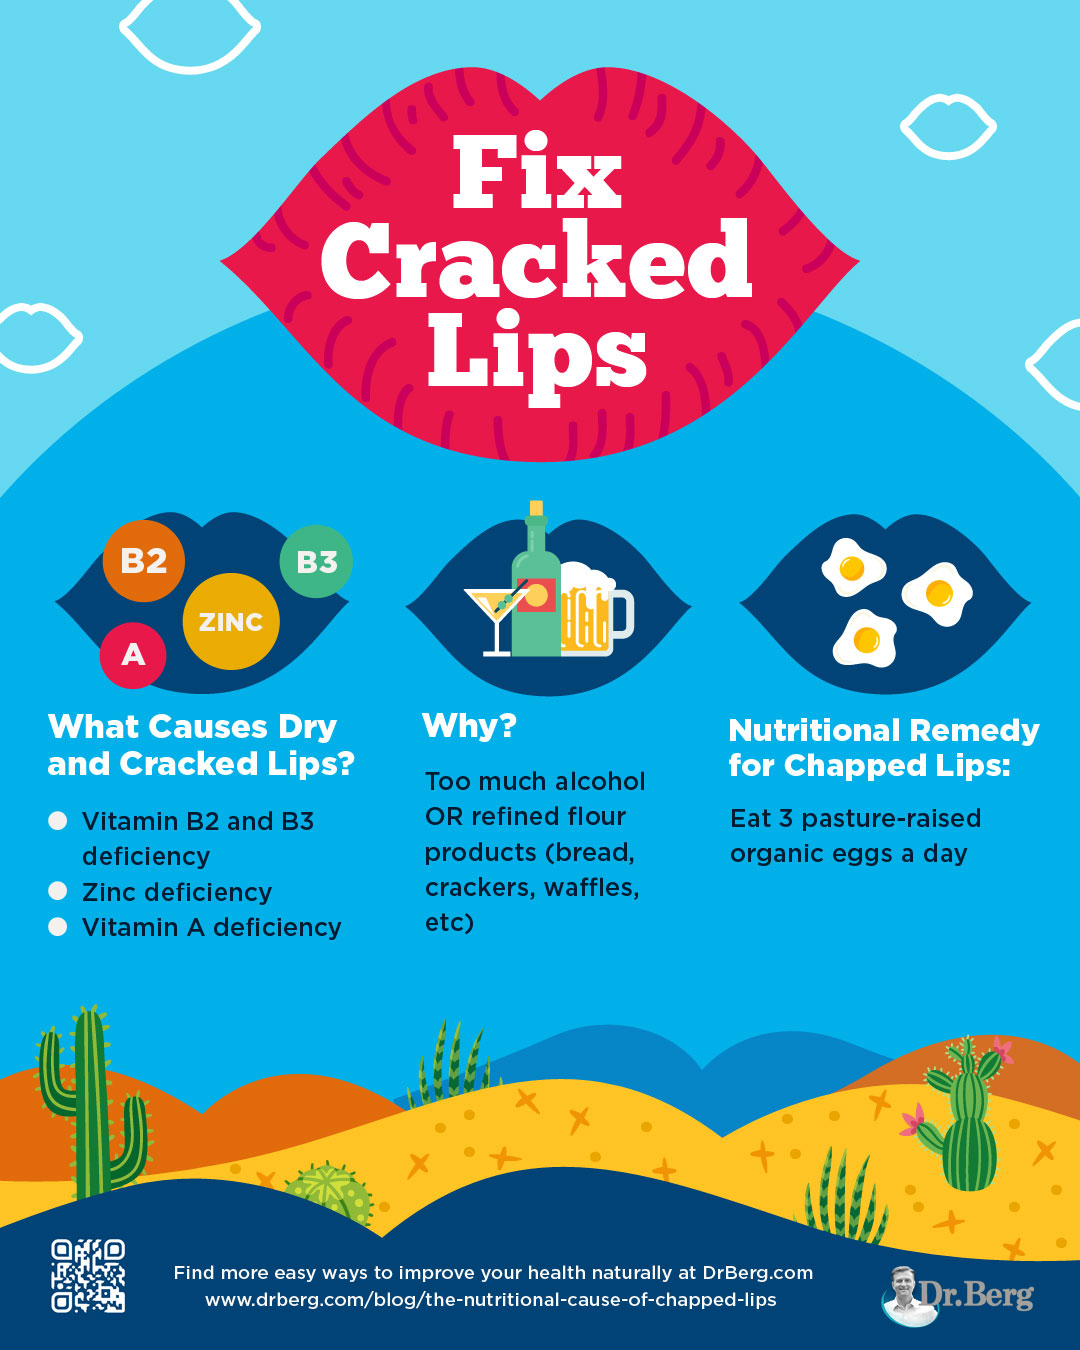 Fix Cracked Lips Infographic | The Nutritional Cause of Chapped Lips